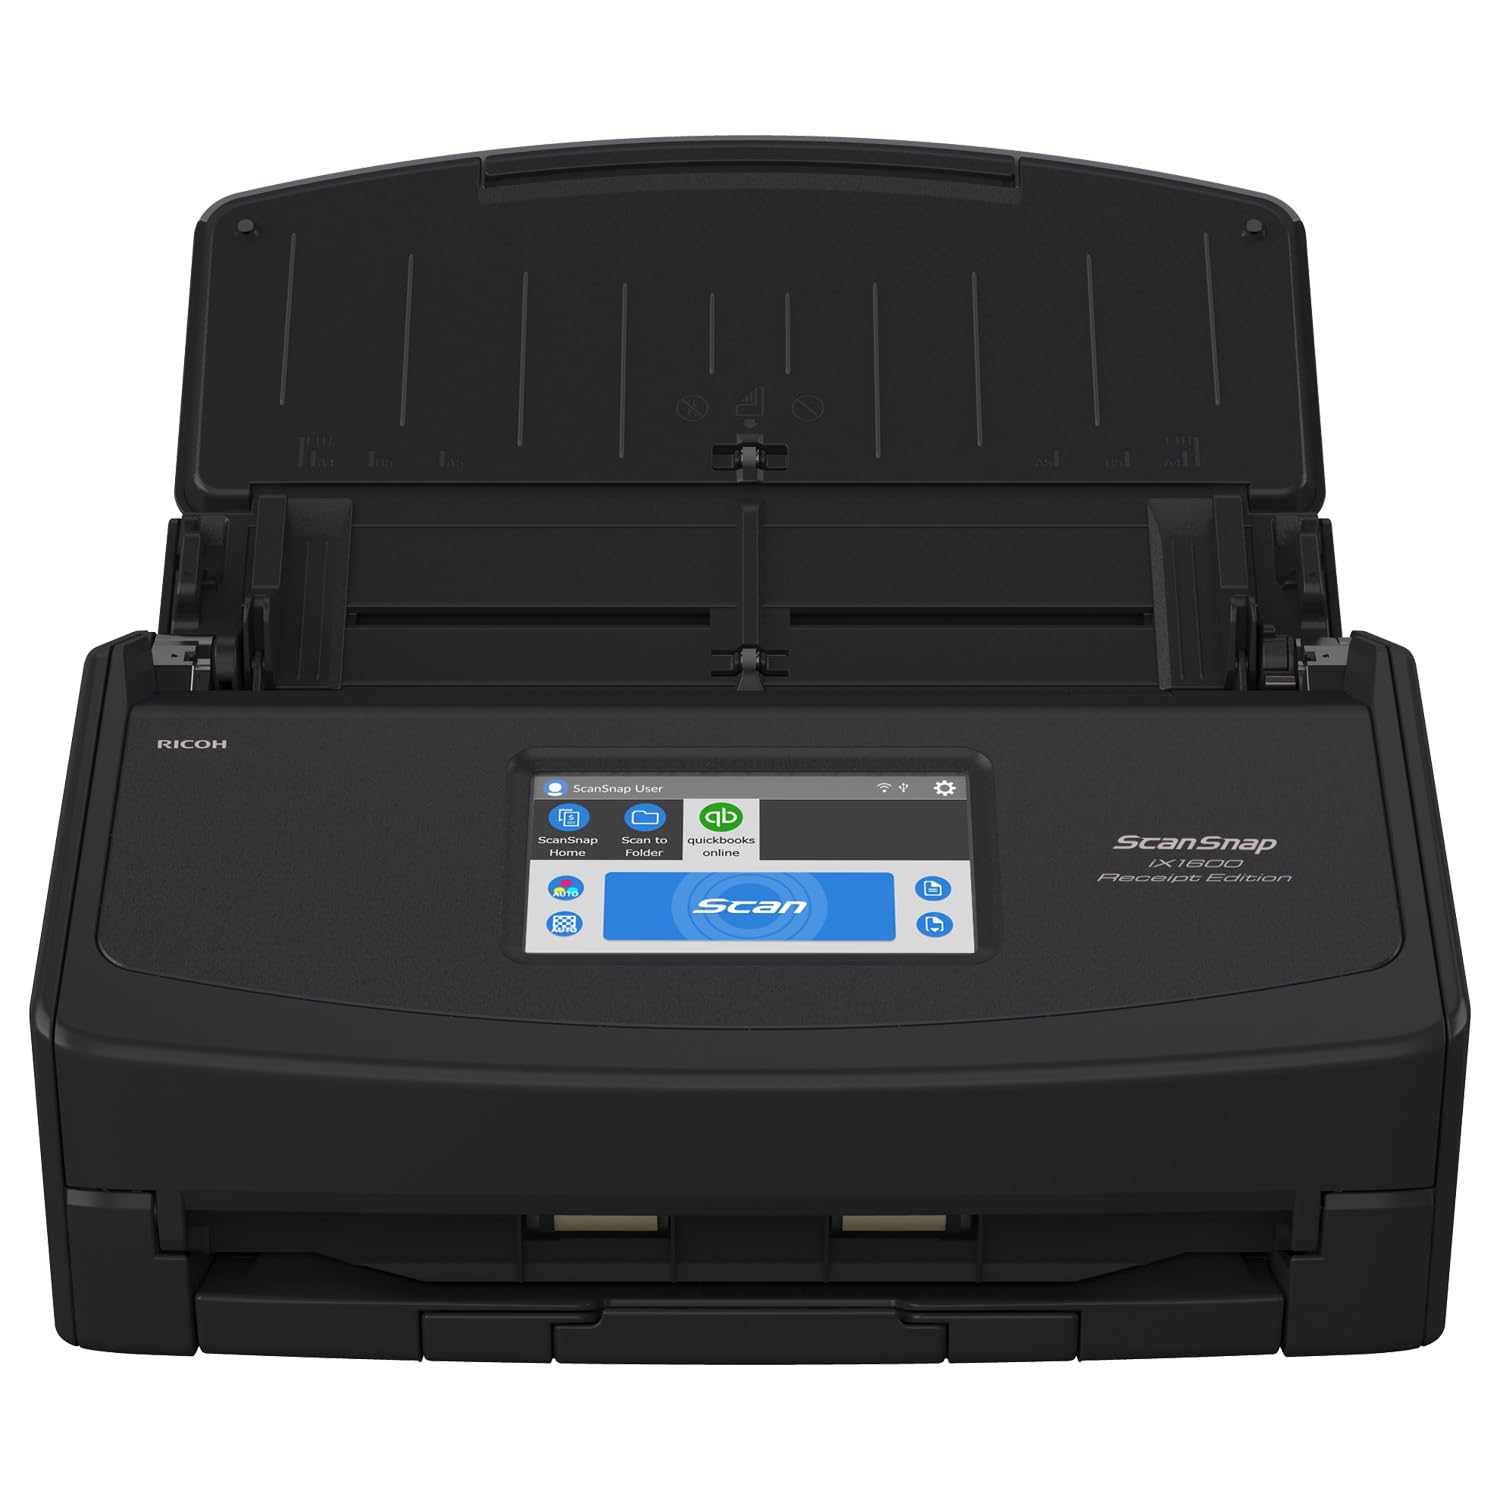 ScanSnap iX1600 Receipt Edition Color Duplex Invoice Document Scanner for Mac and PC Works with QuickBooks Online, Black